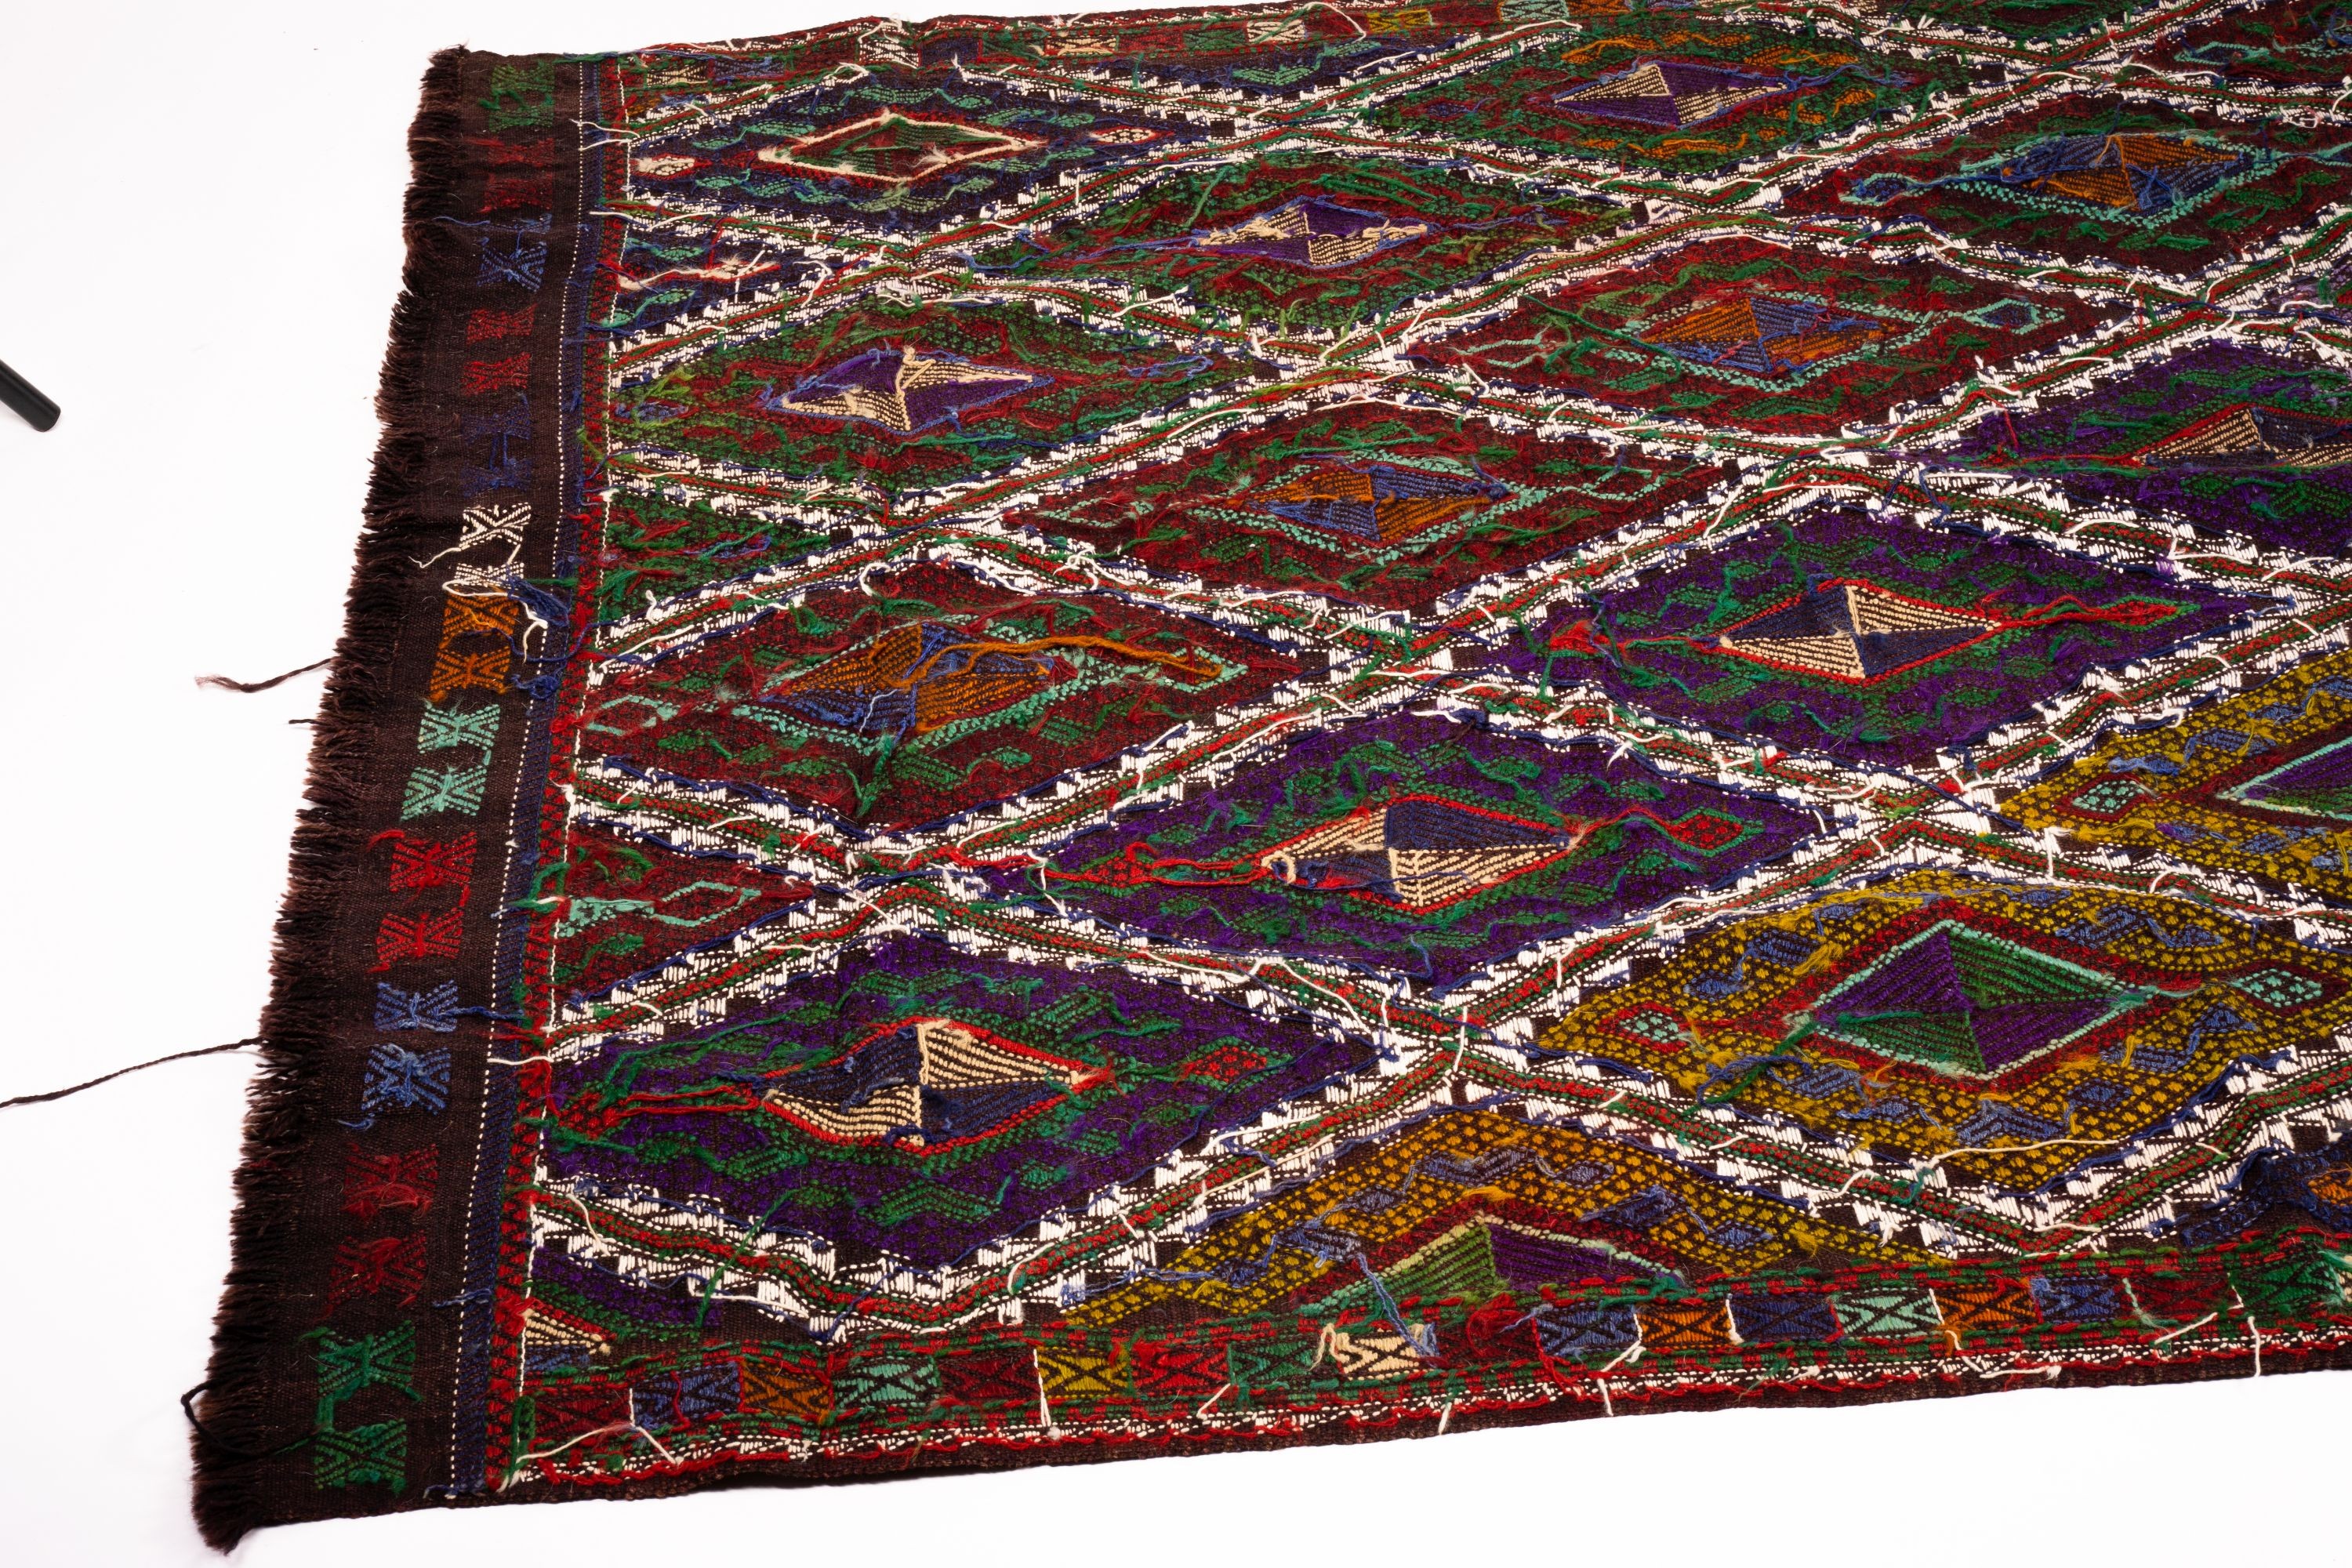 A Moroccan wool tile pattern rug, 240 x 160cm